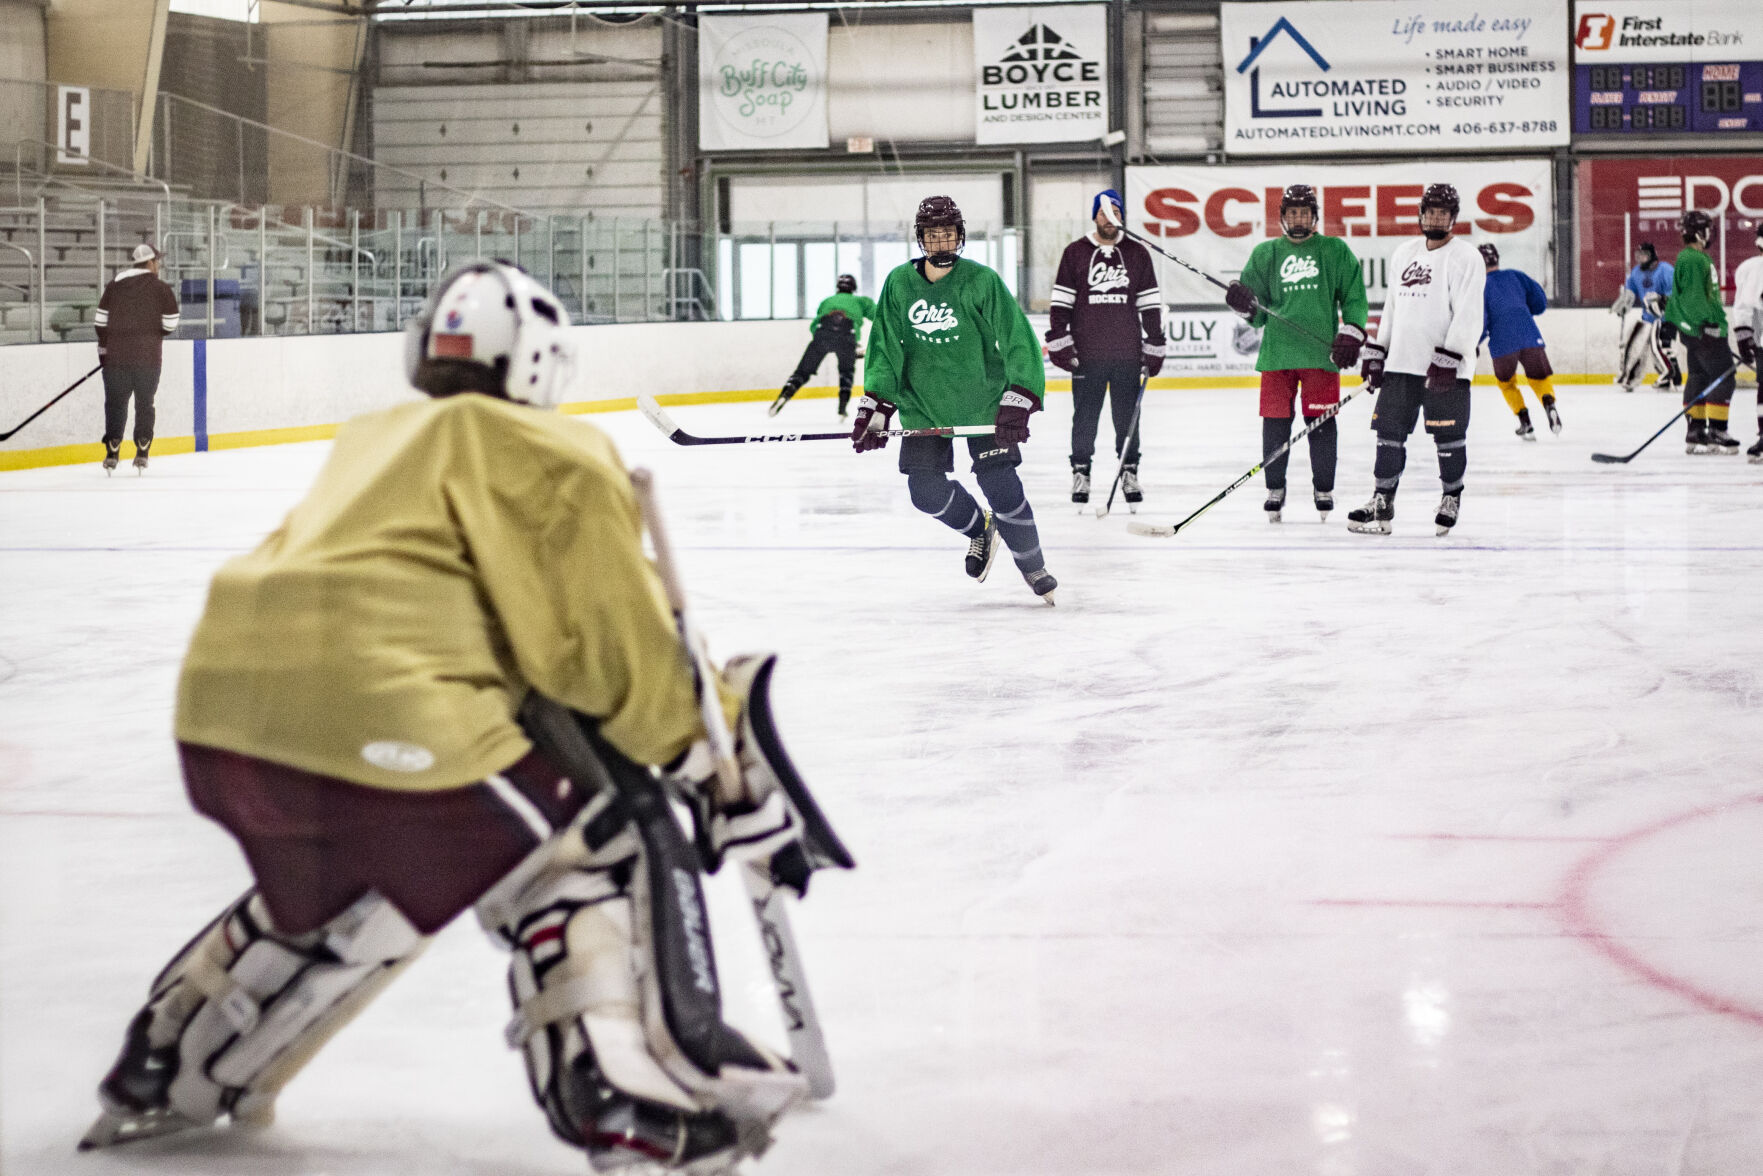 Griz hockey prepares for games after successful first year Sports montanakaimin